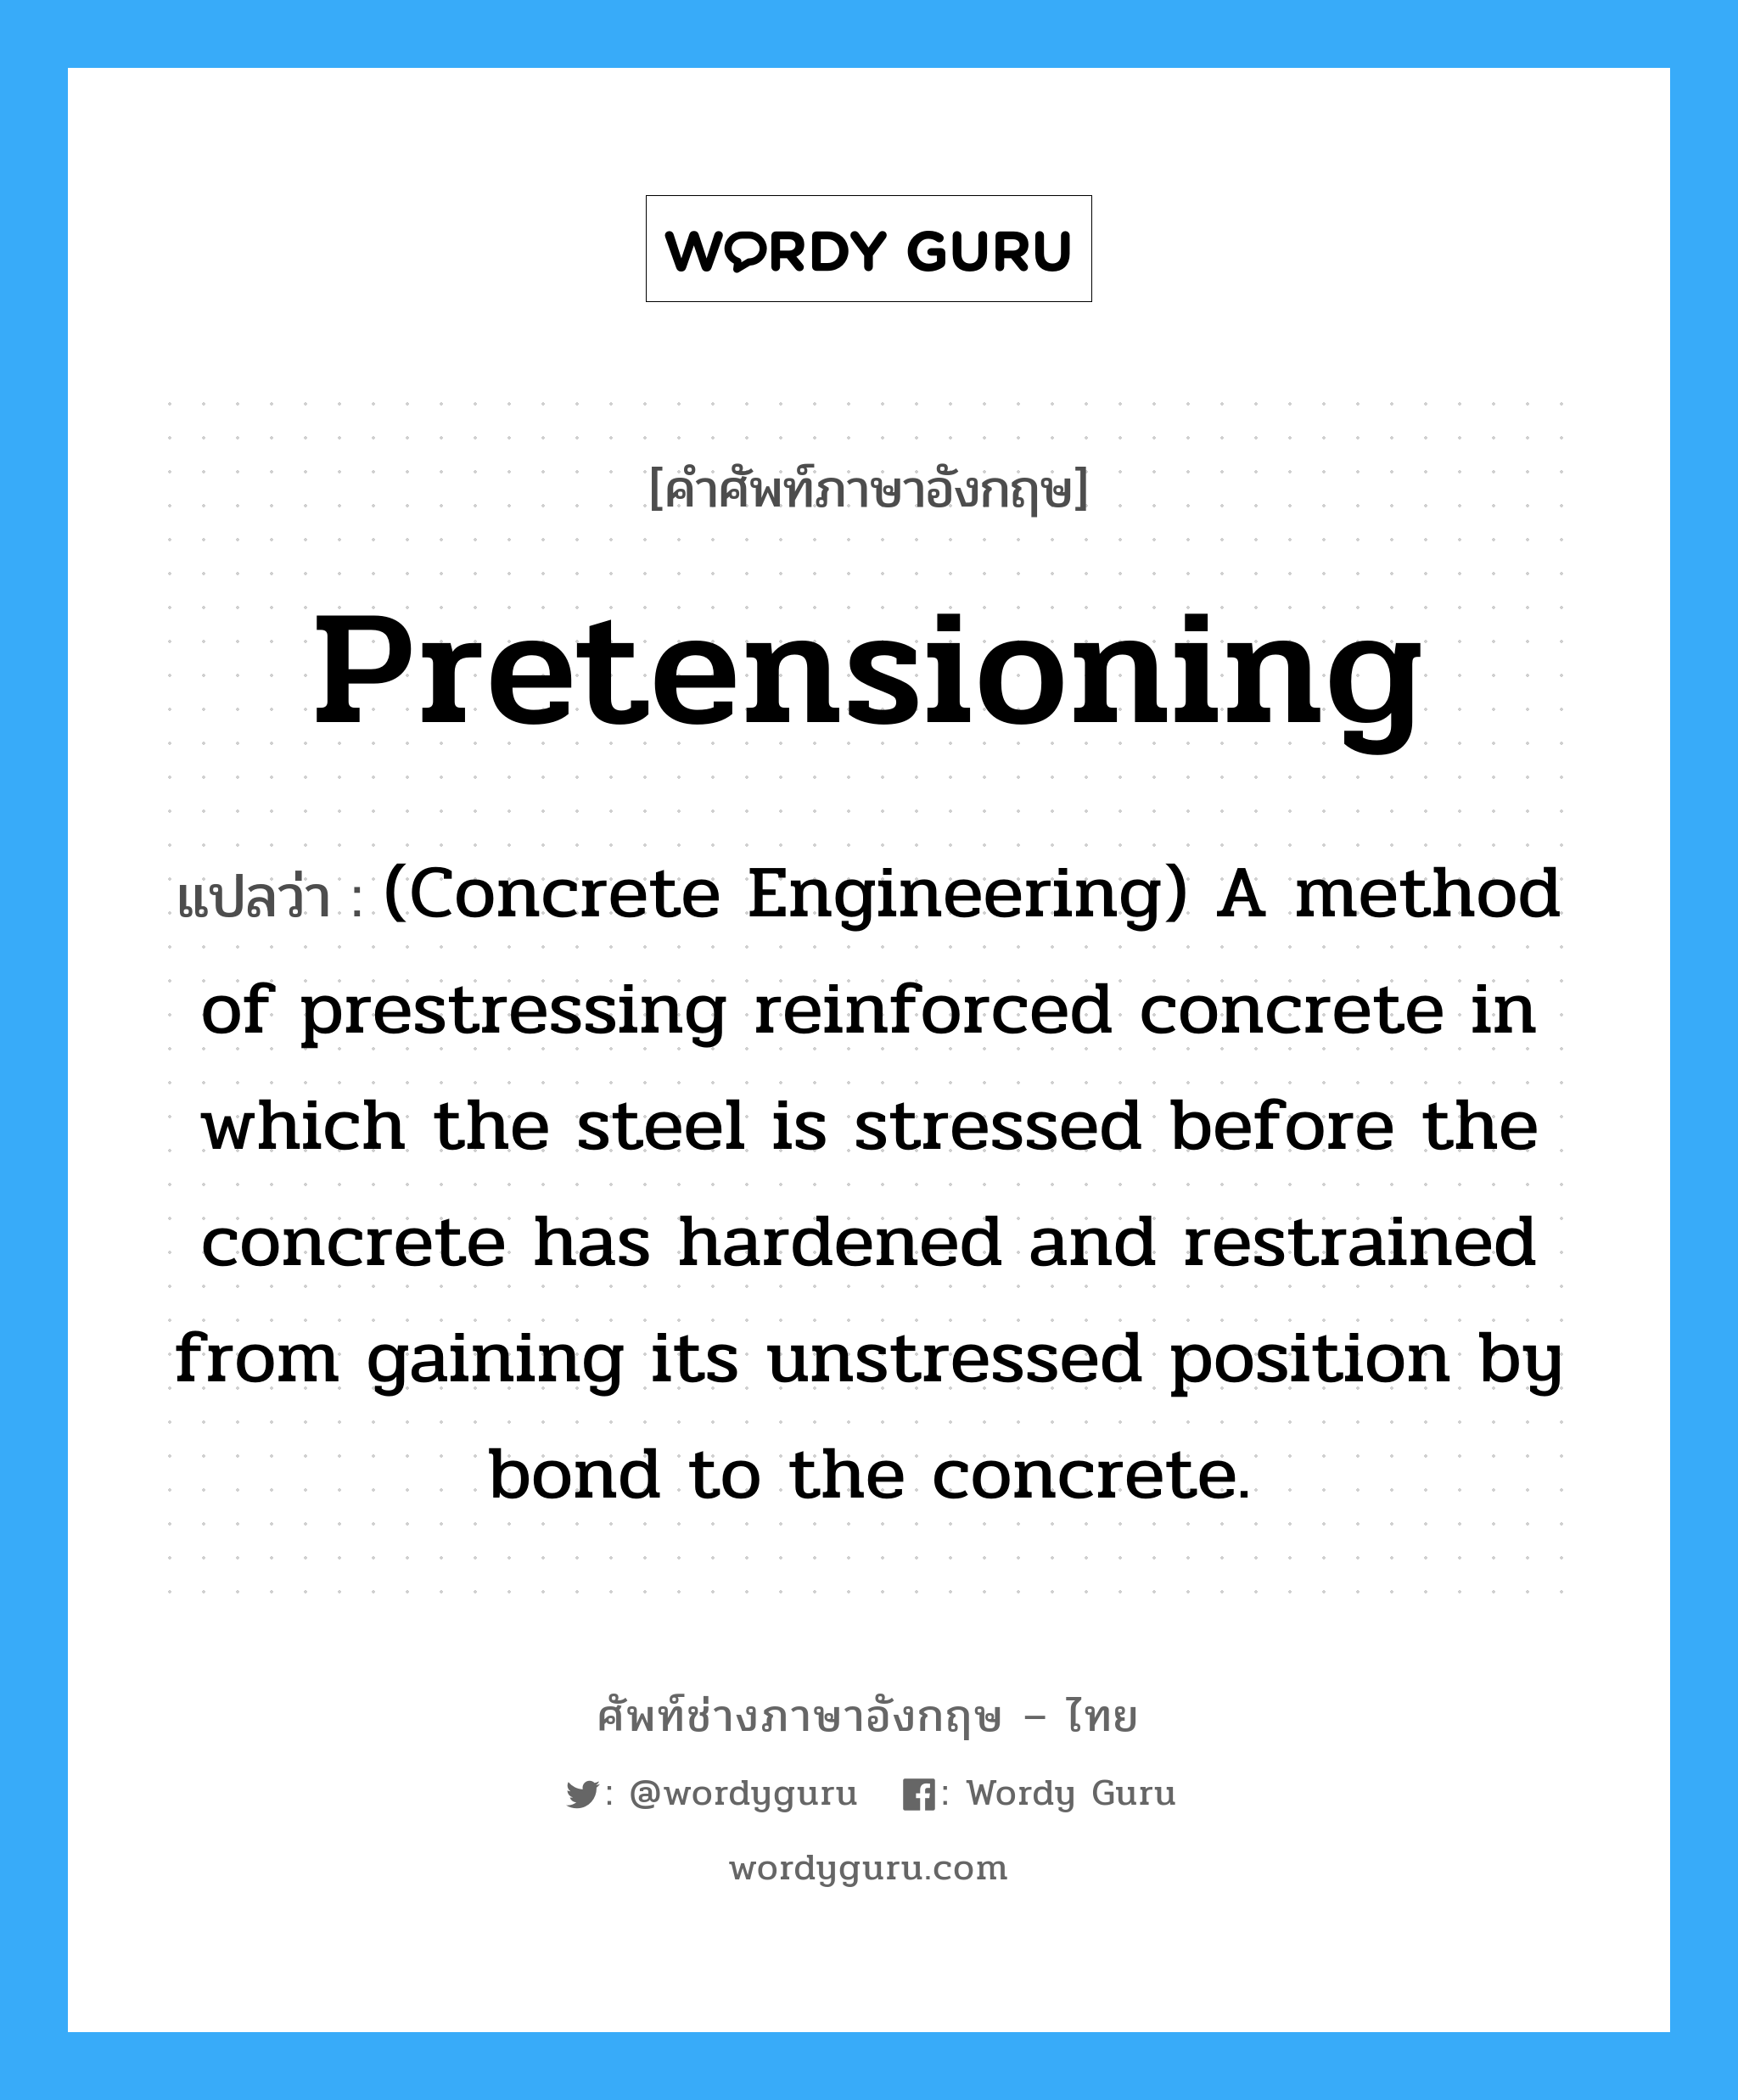 (Concrete Engineering) A method of prestressing reinforced concrete in which the steel is stressed before the concrete has hardened and restrained from gaining its unstressed position by bond to the concrete. ภาษาอังกฤษ?, คำศัพท์ช่างภาษาอังกฤษ - ไทย (Concrete Engineering) A method of prestressing reinforced concrete in which the steel is stressed before the concrete has hardened and restrained from gaining its unstressed position by bond to the concrete. คำศัพท์ภาษาอังกฤษ (Concrete Engineering) A method of prestressing reinforced concrete in which the steel is stressed before the concrete has hardened and restrained from gaining its unstressed position by bond to the concrete. แปลว่า Pretensioning